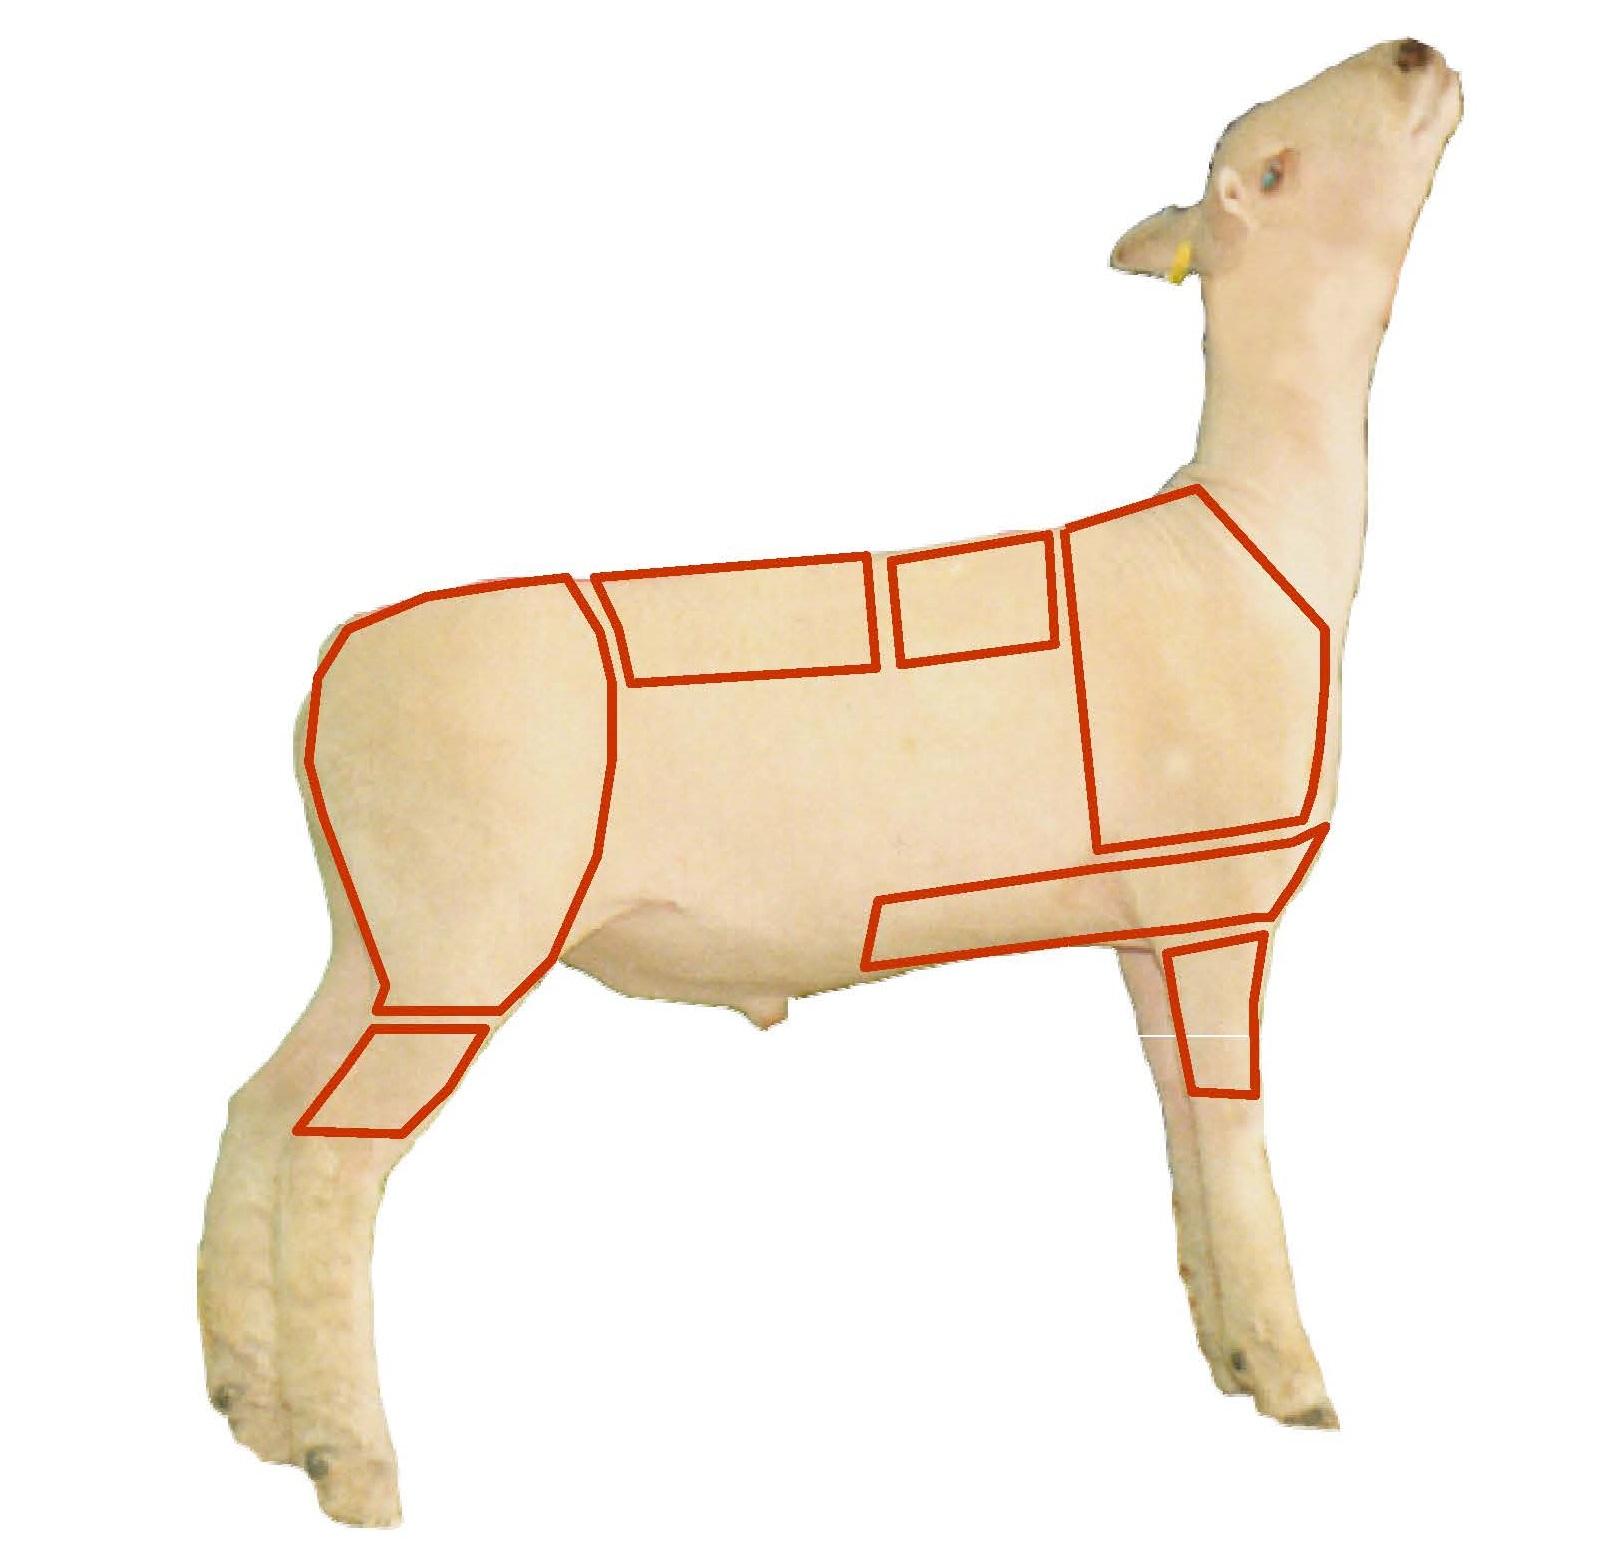 Sheep Wholesale Meat Cuts